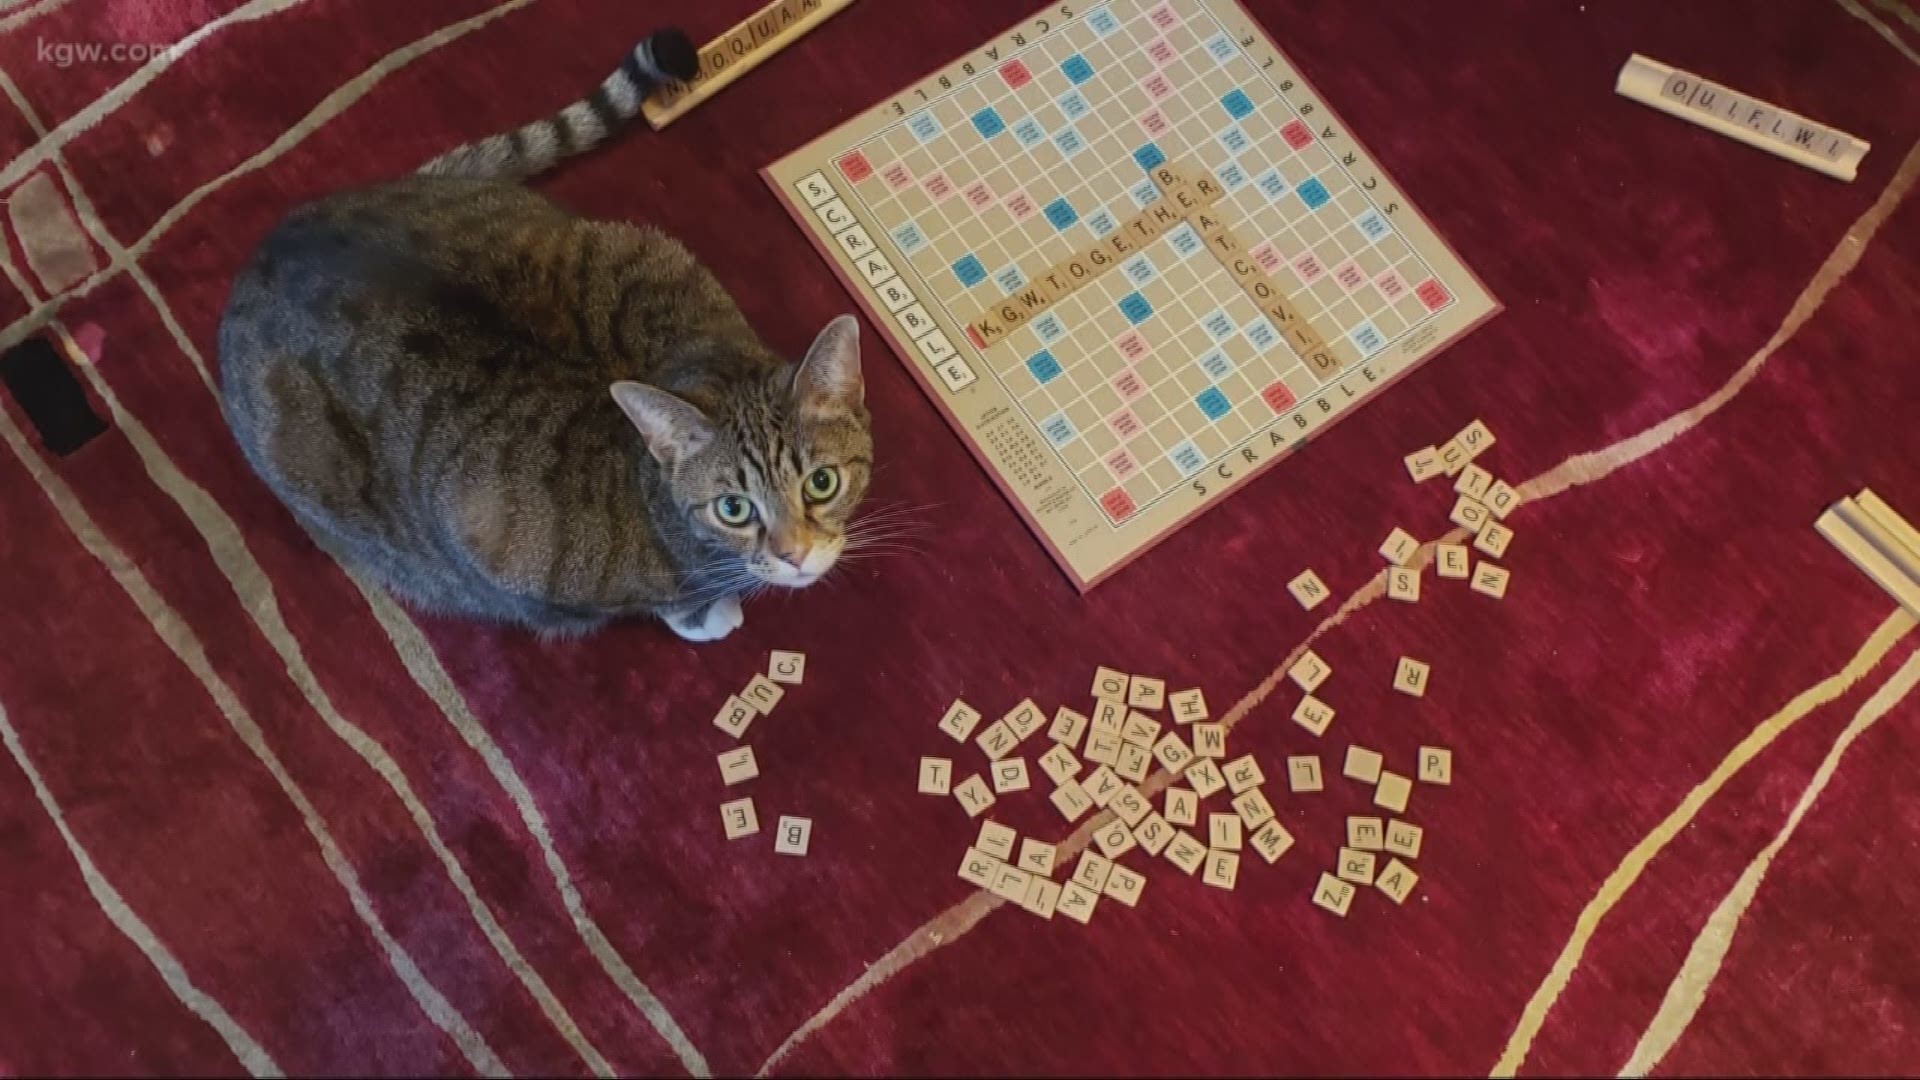 Stay home cat scrabble